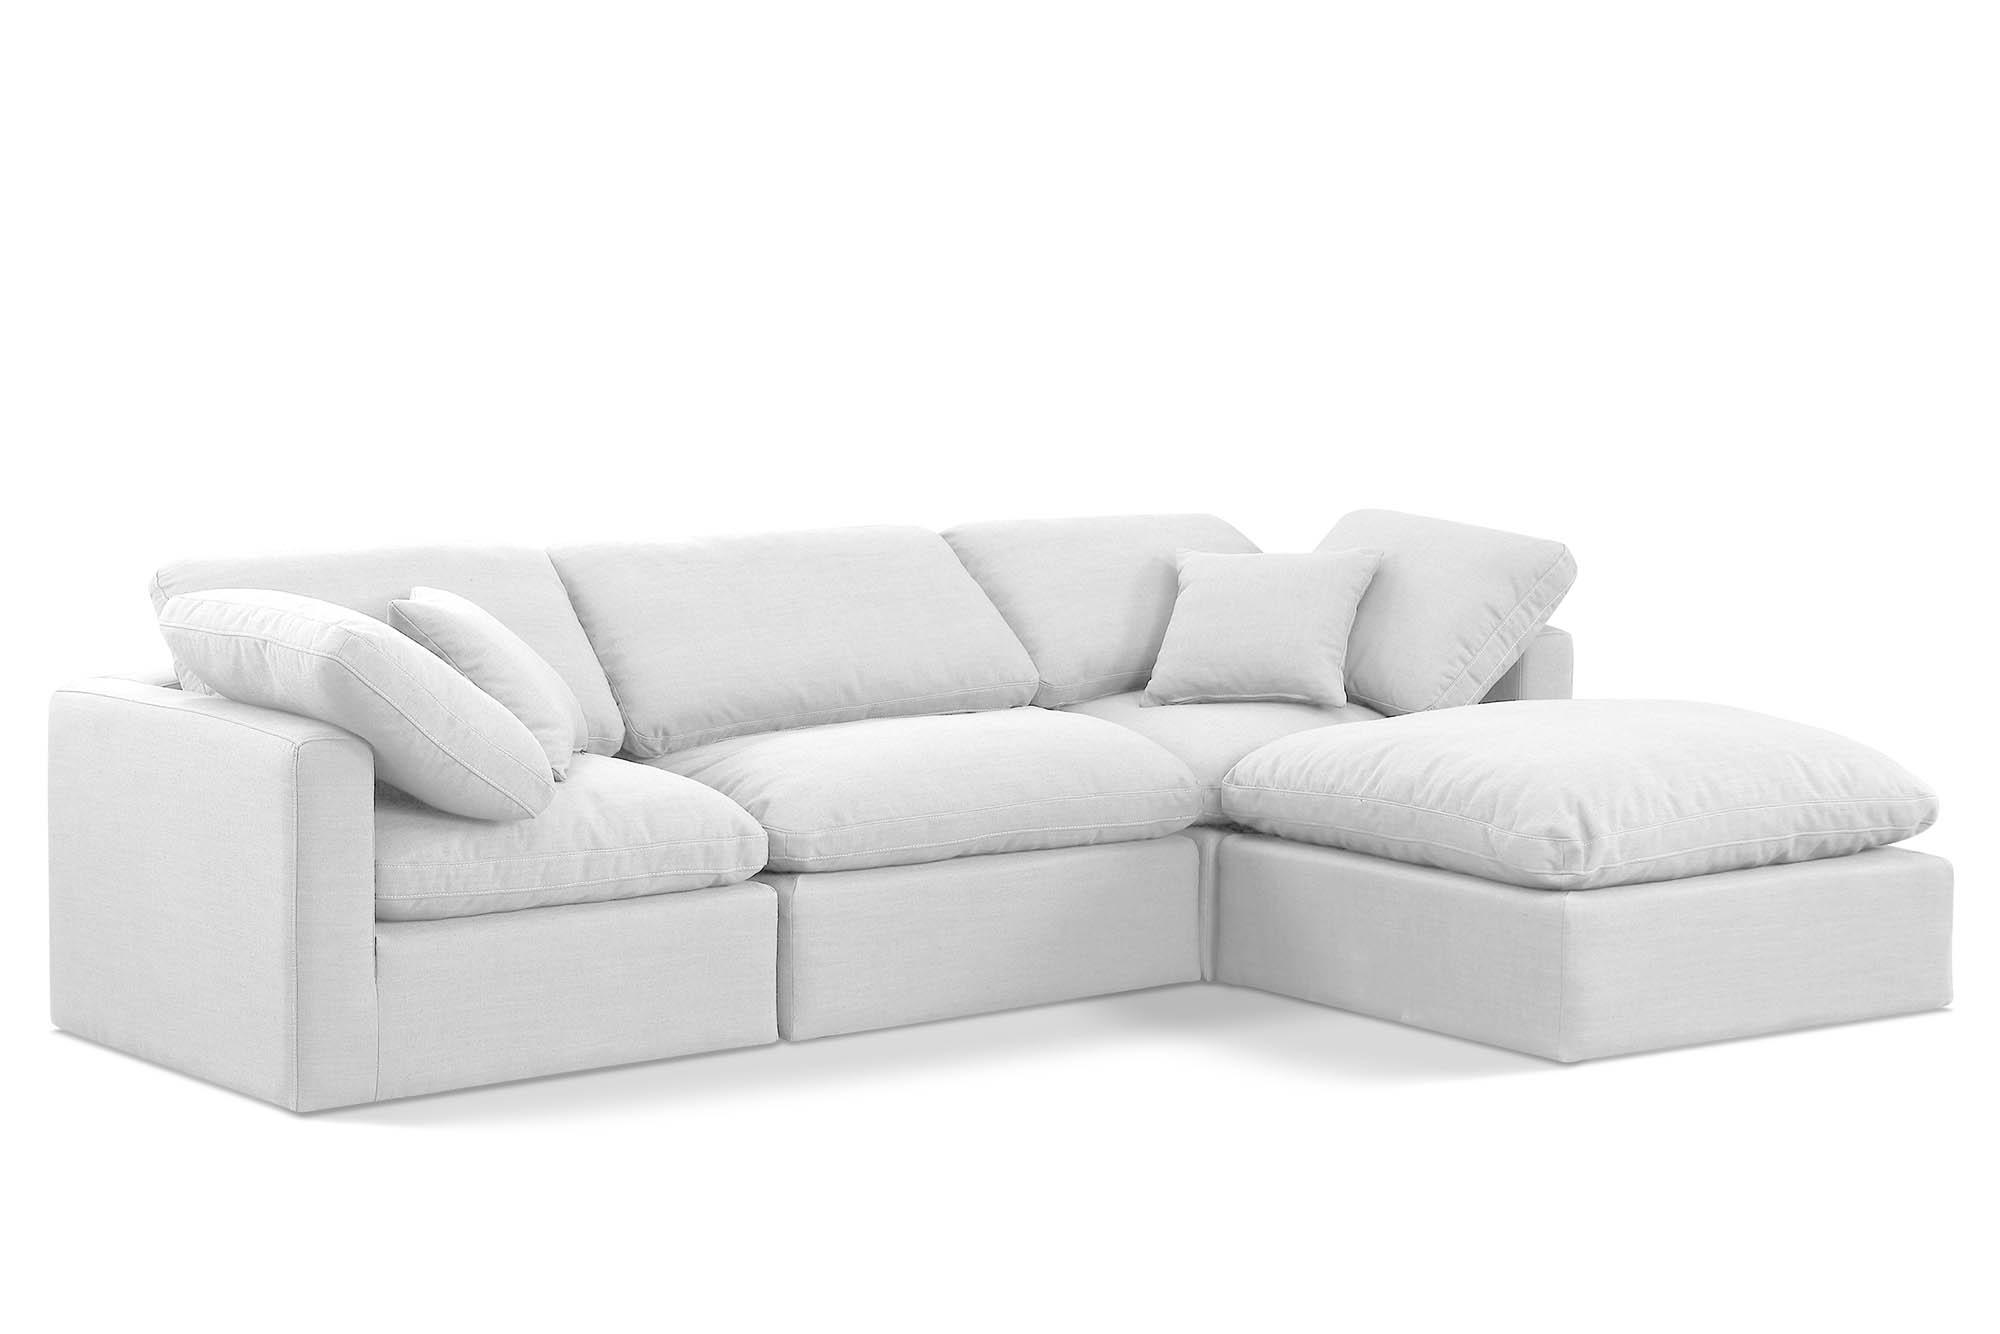 Contemporary, Modern Modular Sectional INDULGE 141White-Sec4A 141White-Sec4A in White Linen